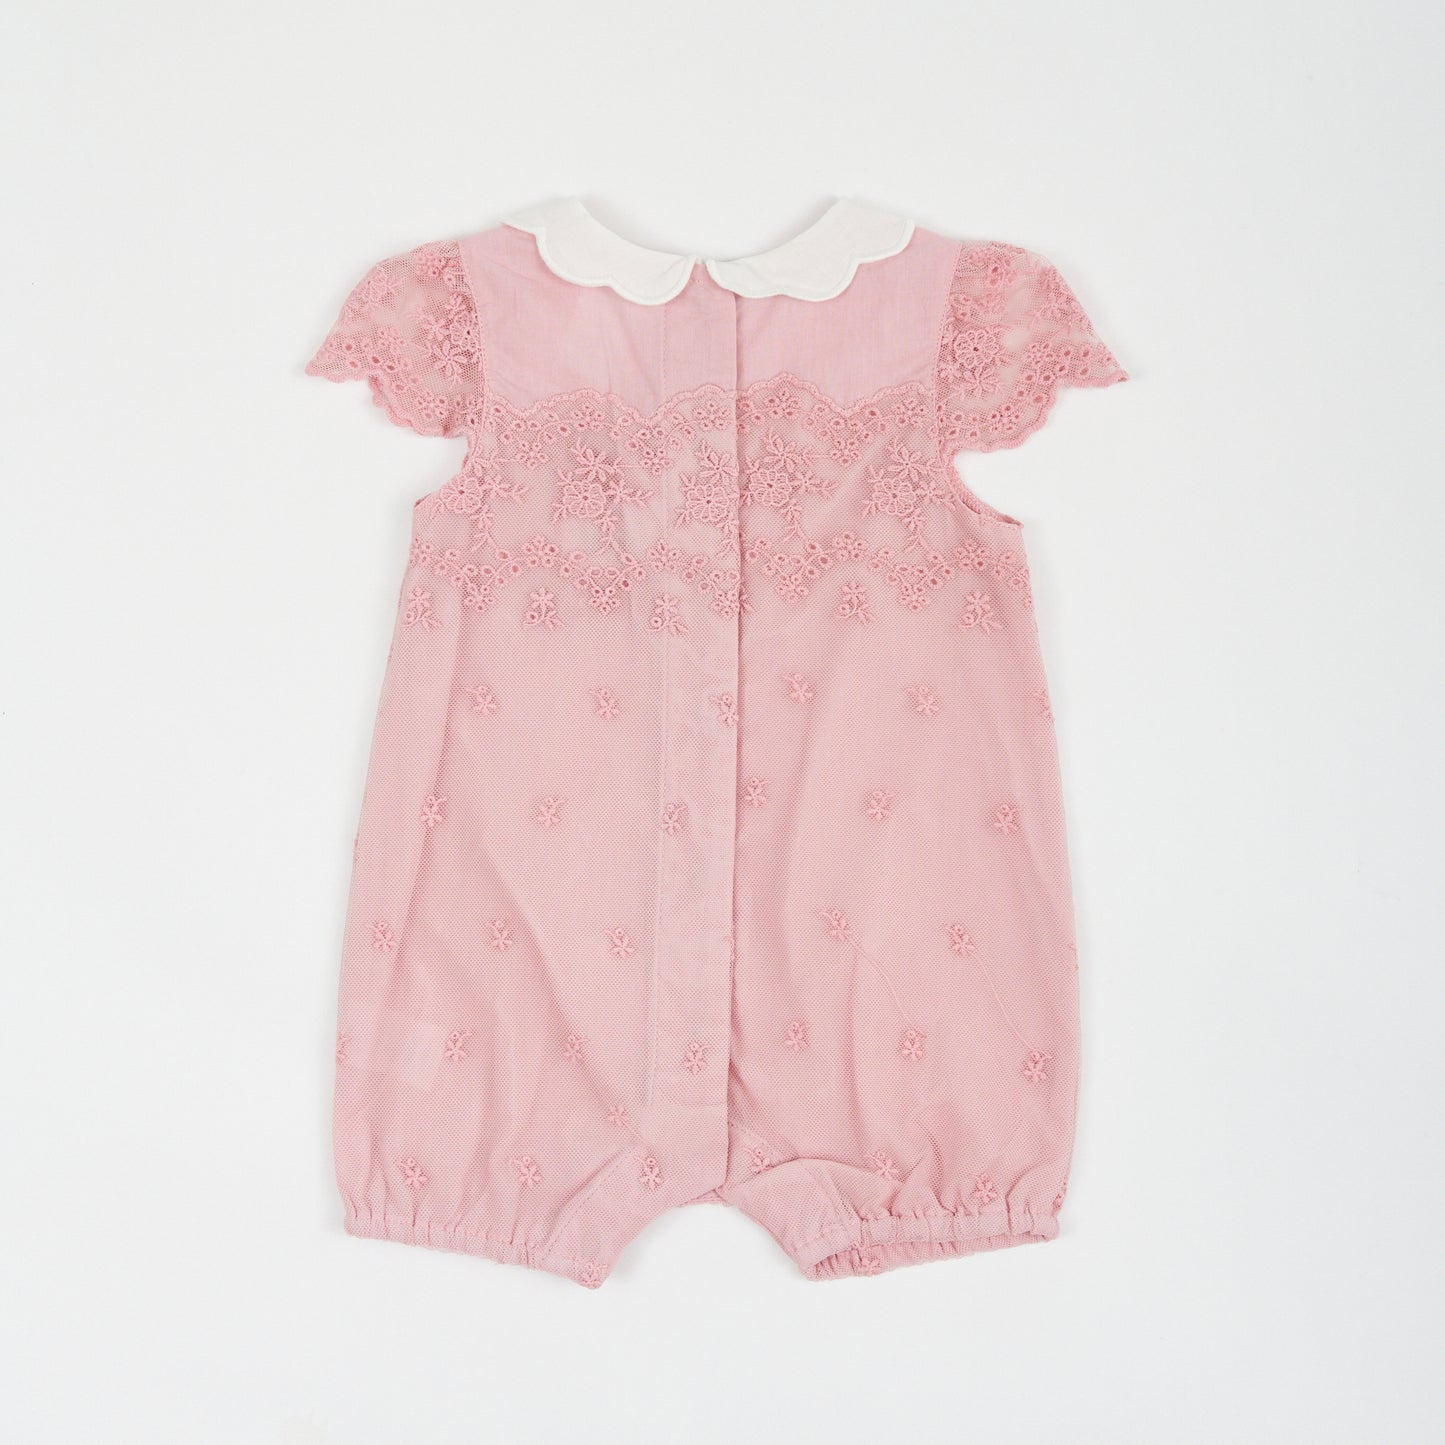 Baby Girl Dusty Pink Lace Romper